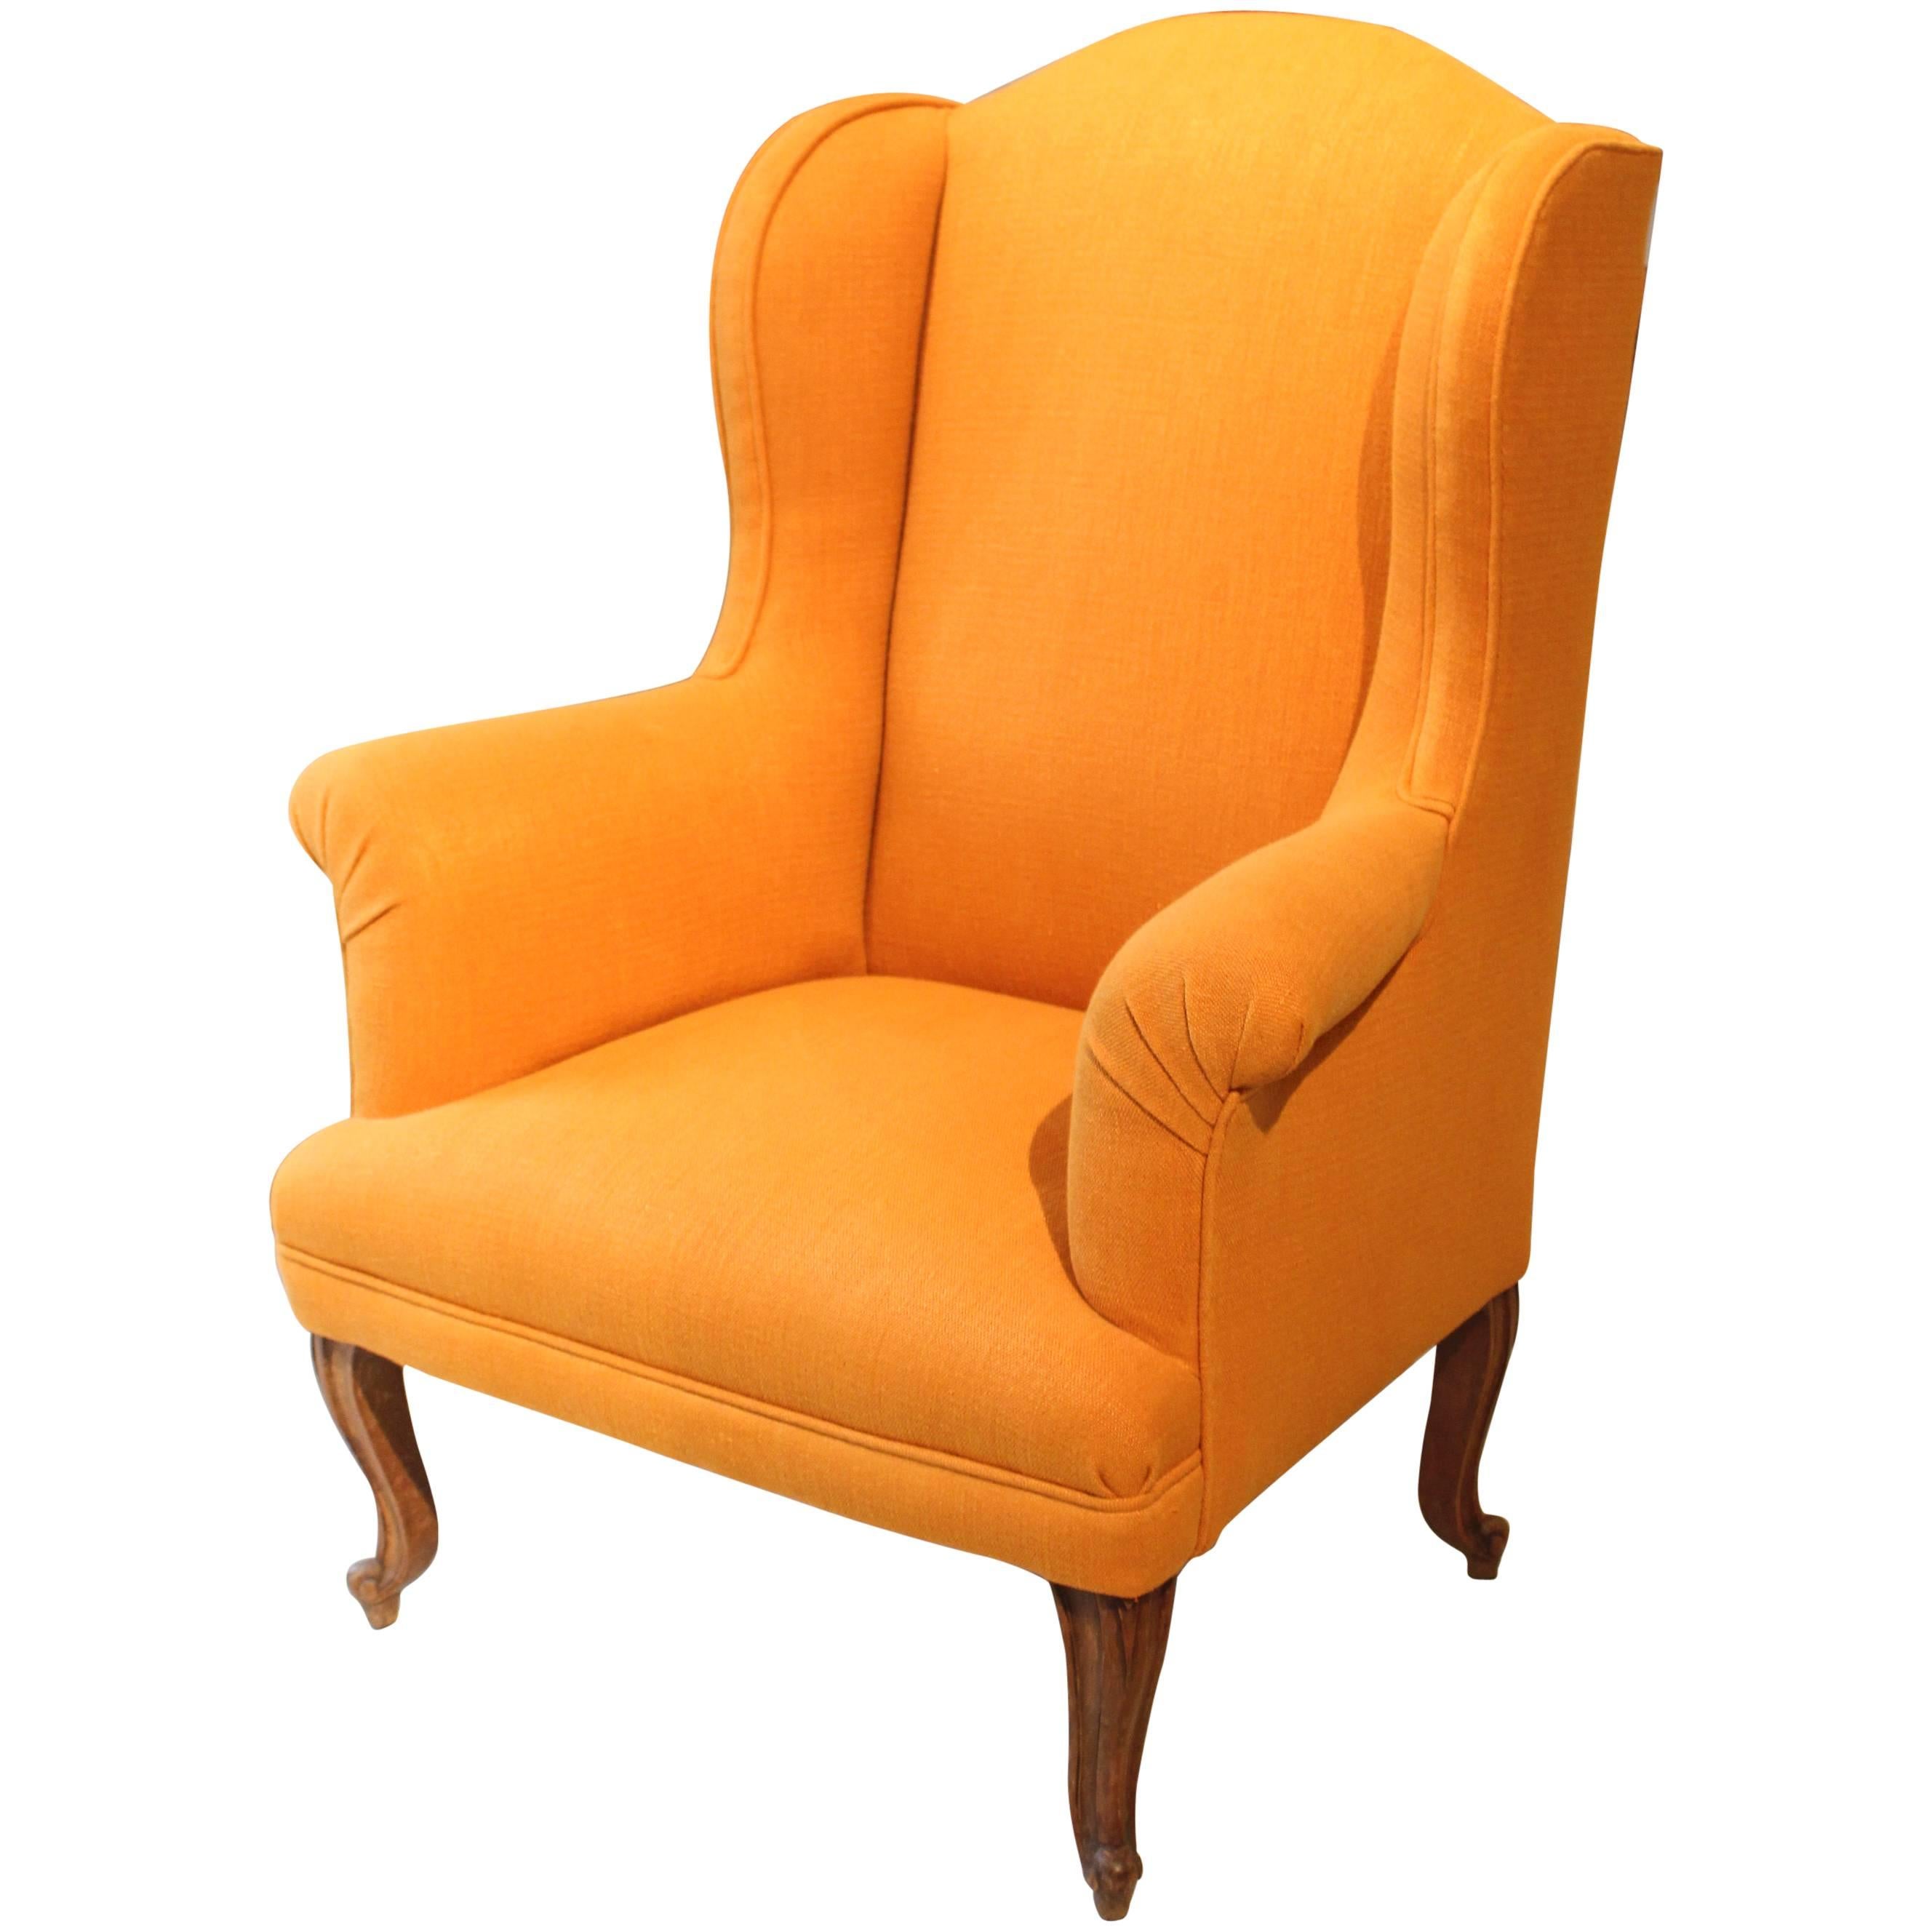 19th c France Petite Wingback Chair